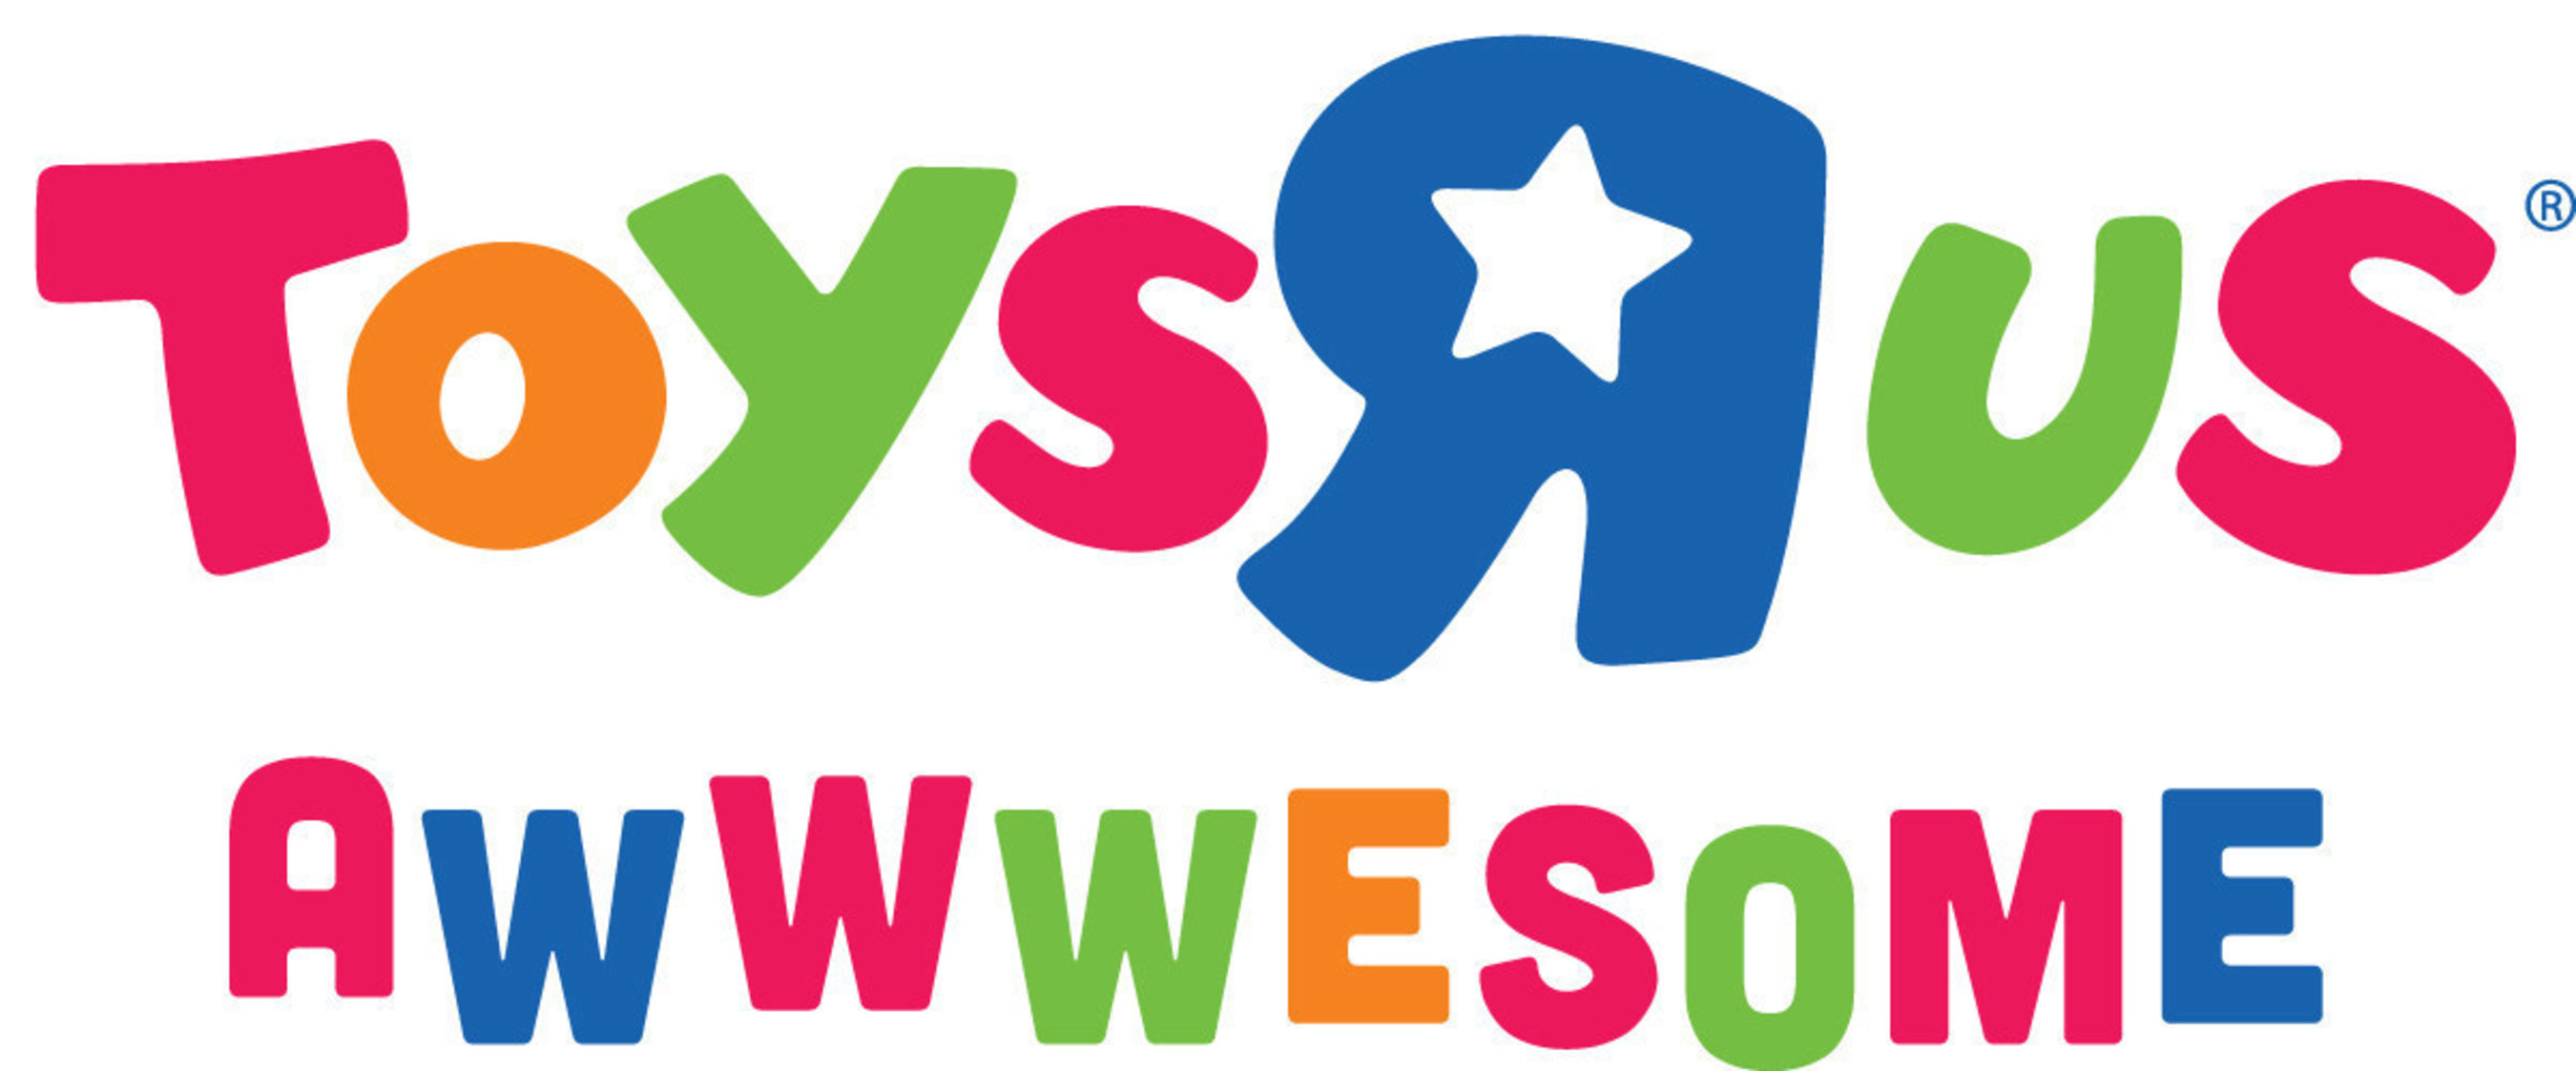 TOYS"R"US(R) INTRODUCES 2015 HOLIDAY MARKETING CAMPAIGN, "AWWWESOME!"